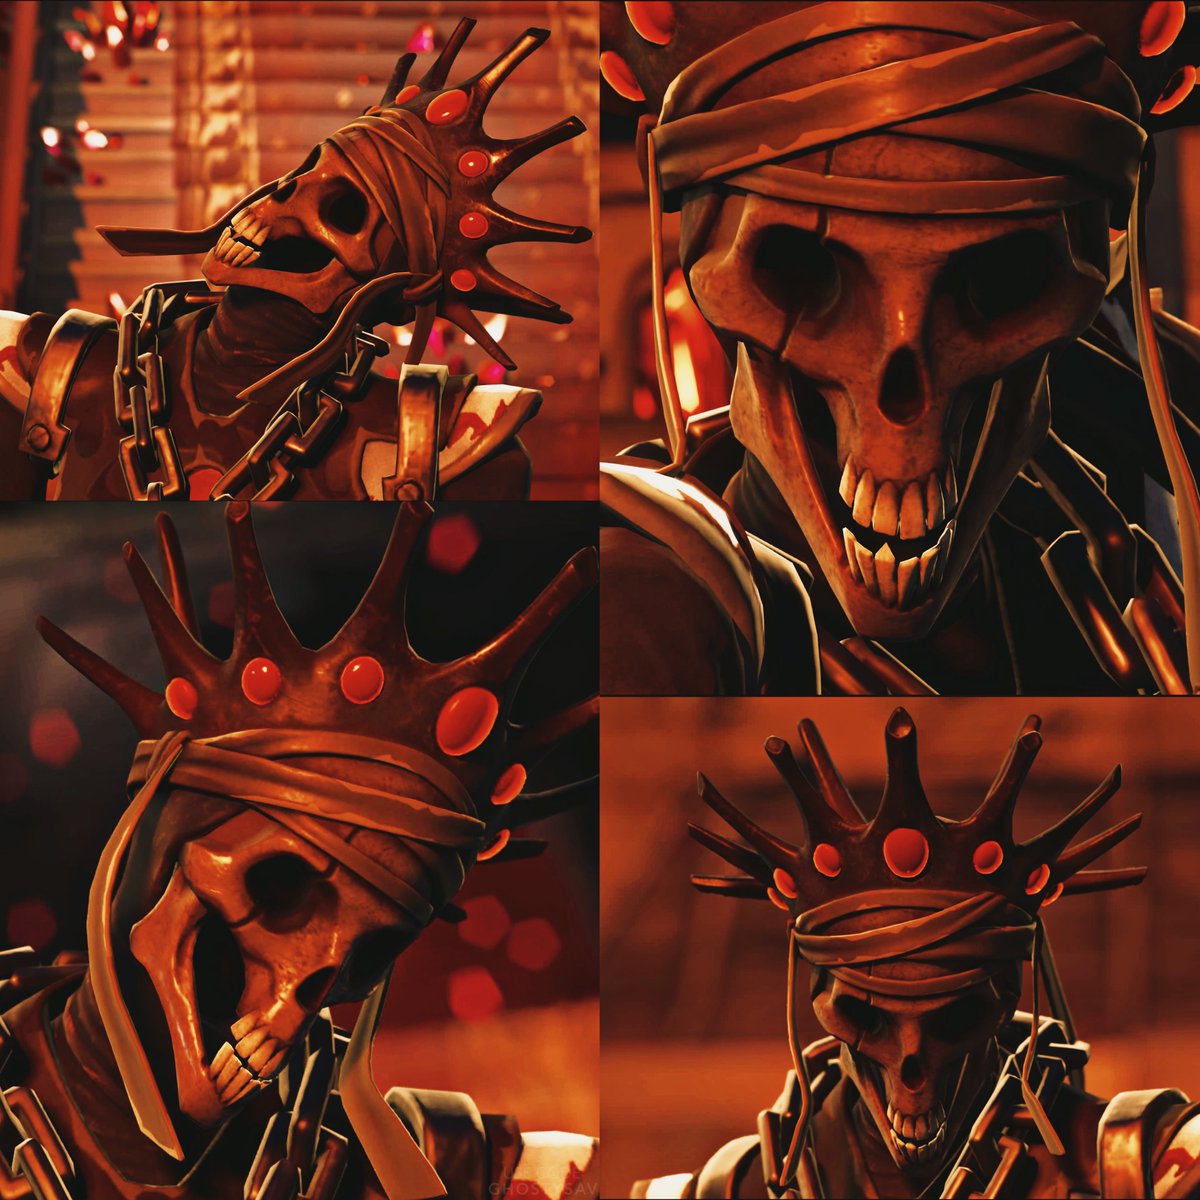 October Fortography Day 24! Spooky scary skeleton⛓ Consider using code “Ghostysav” to support me! 👻 #Fortnite #Fortography #FortniteParadise #Fortnitemares